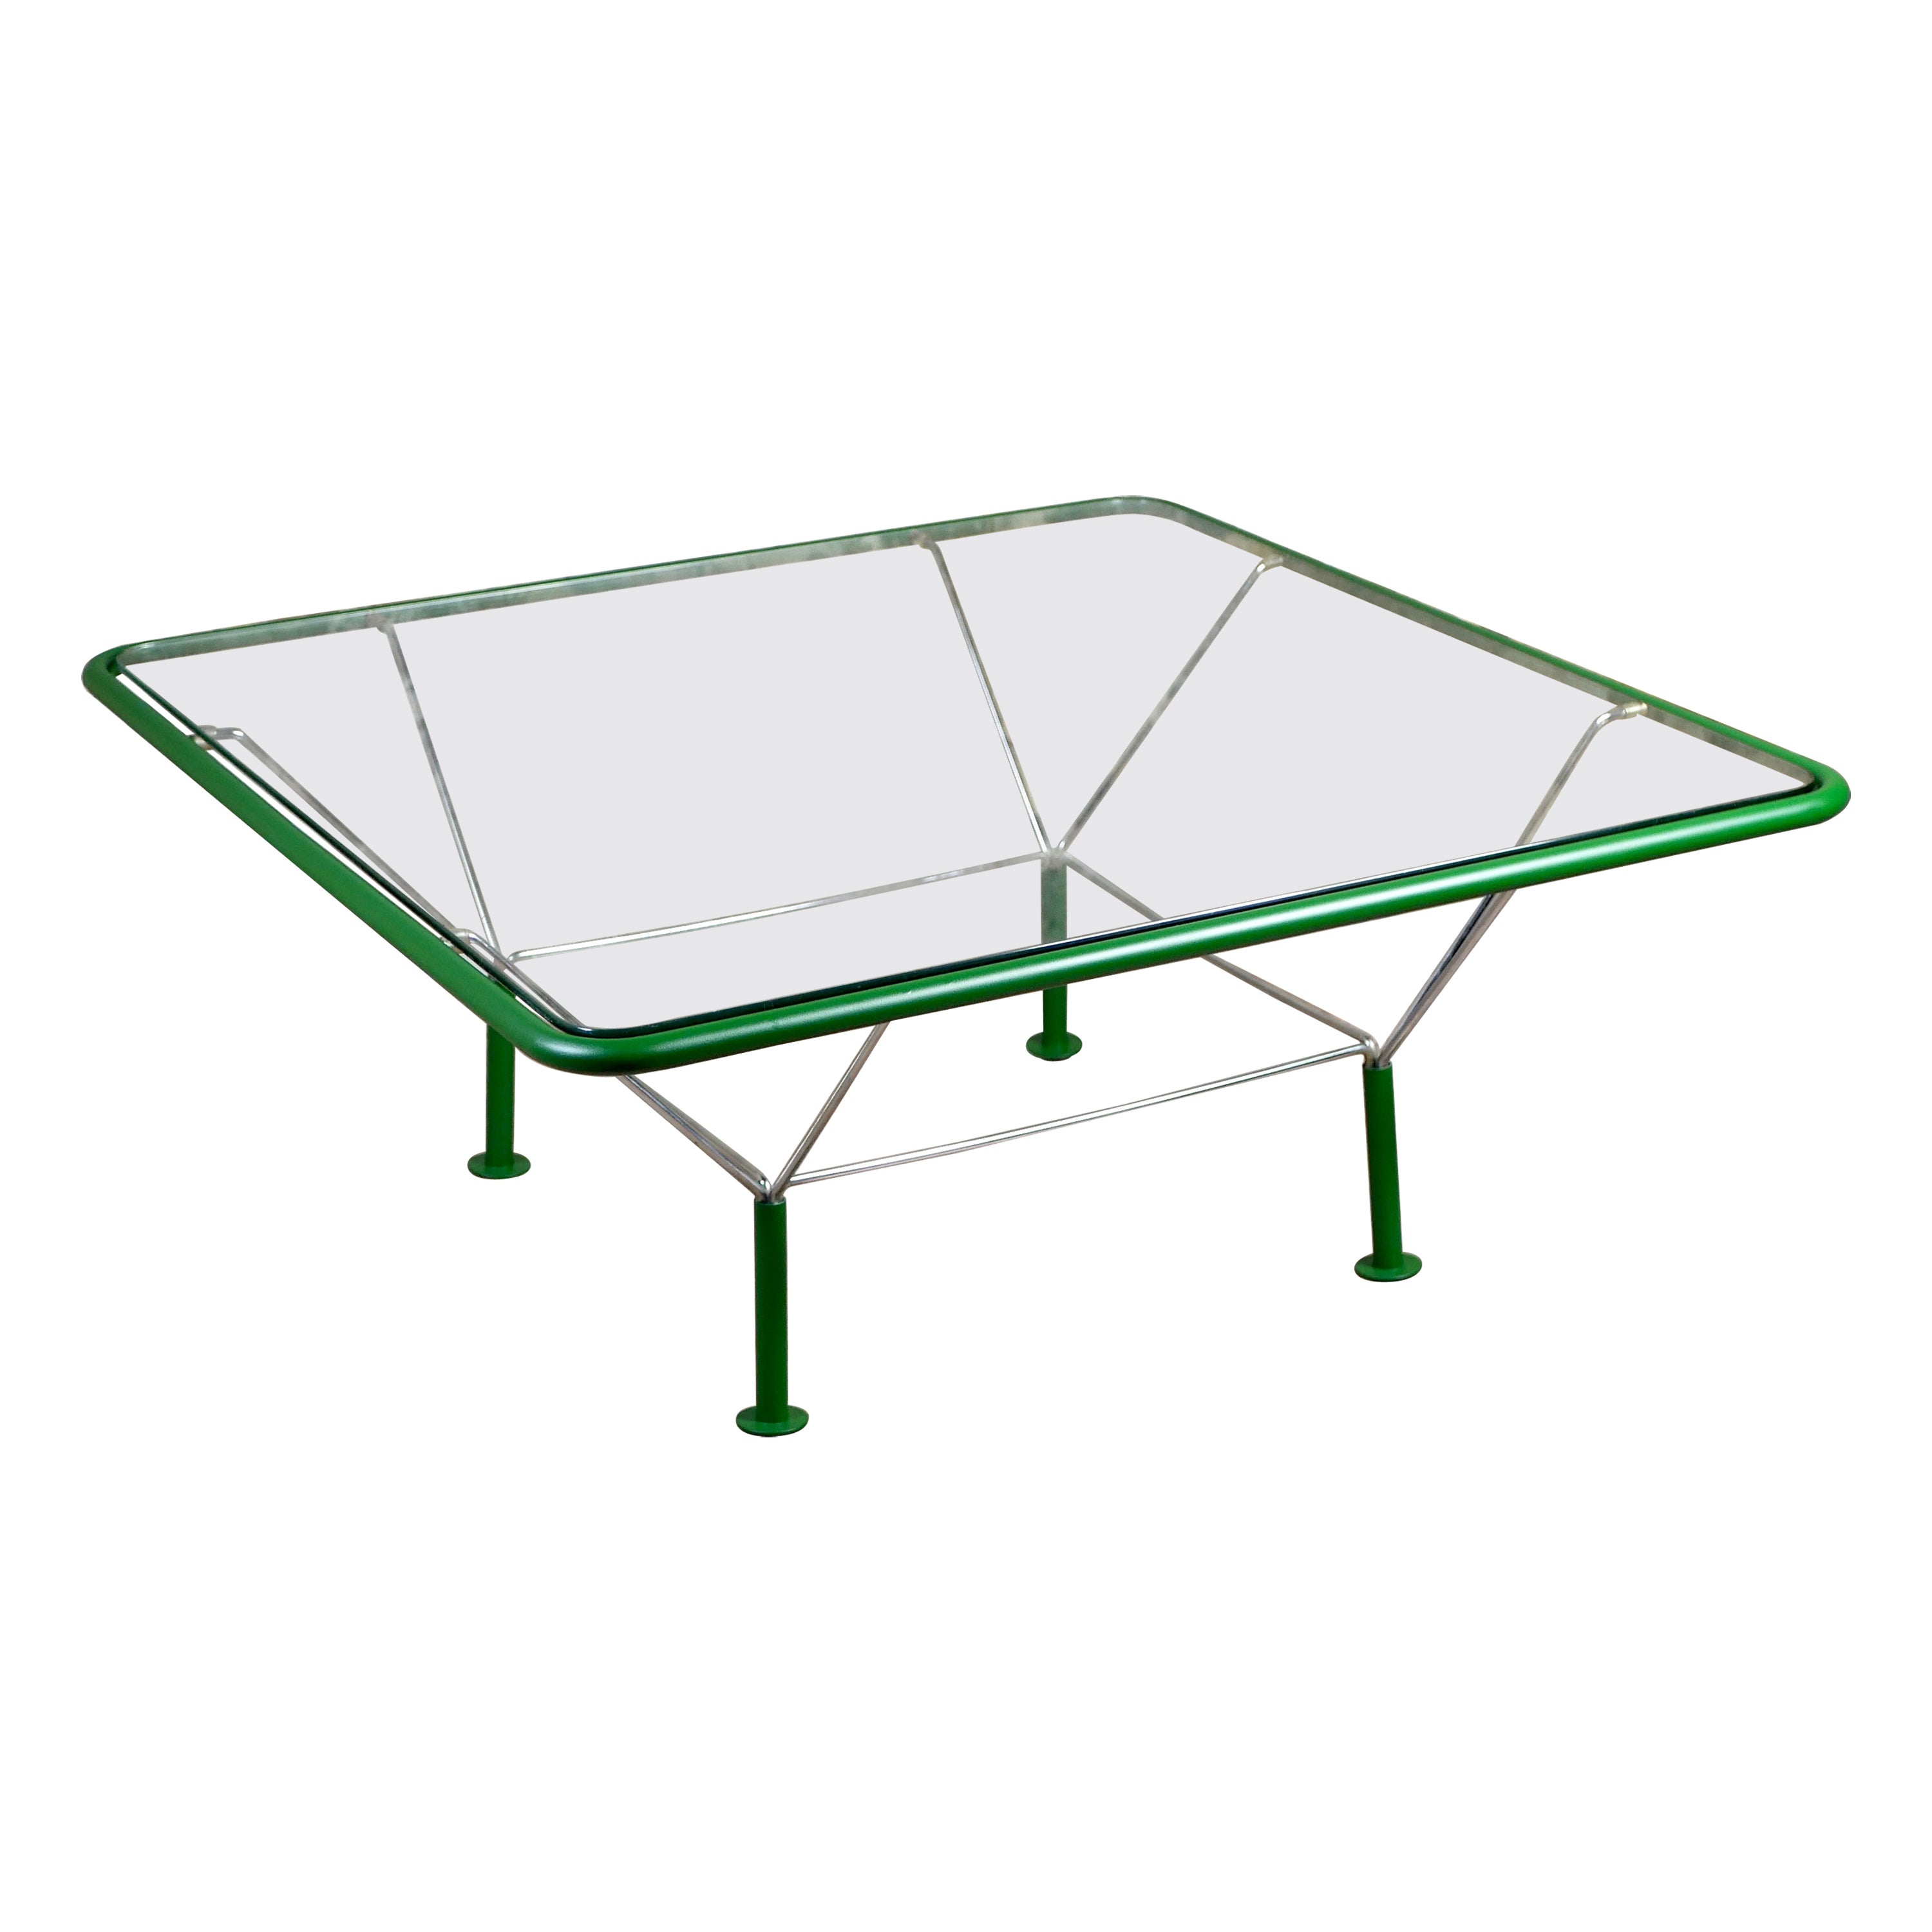 Large green coffee table by Niels Bendtsen, made in Denmark in the 1970s